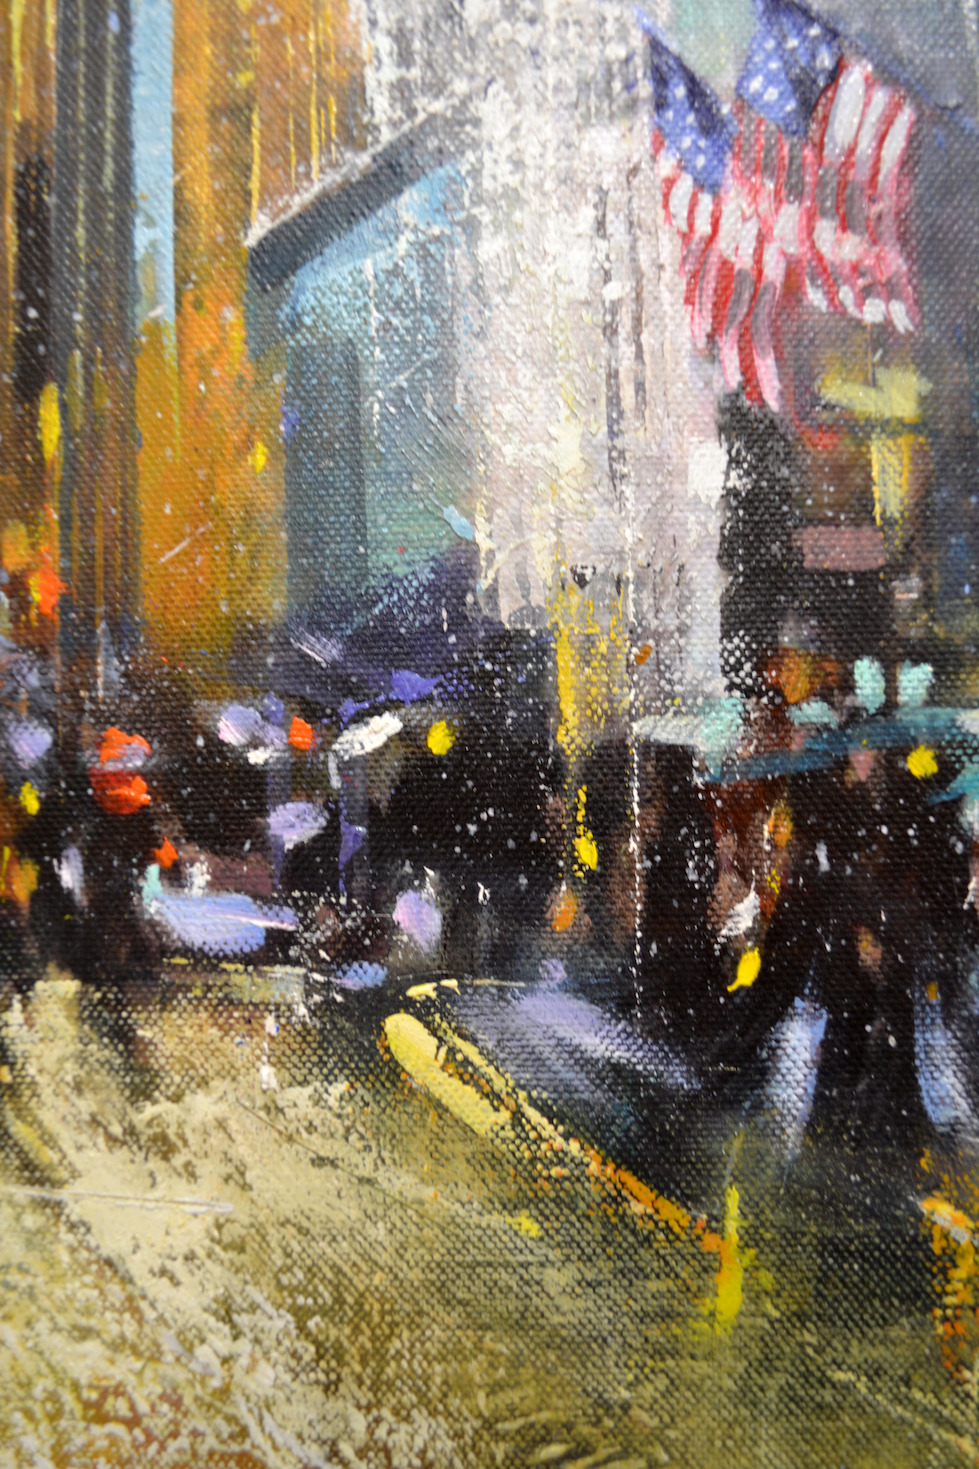 Close Up Detail 2 Of Acrylic Painting "Flatiron Building District" By Judith Dalozzo